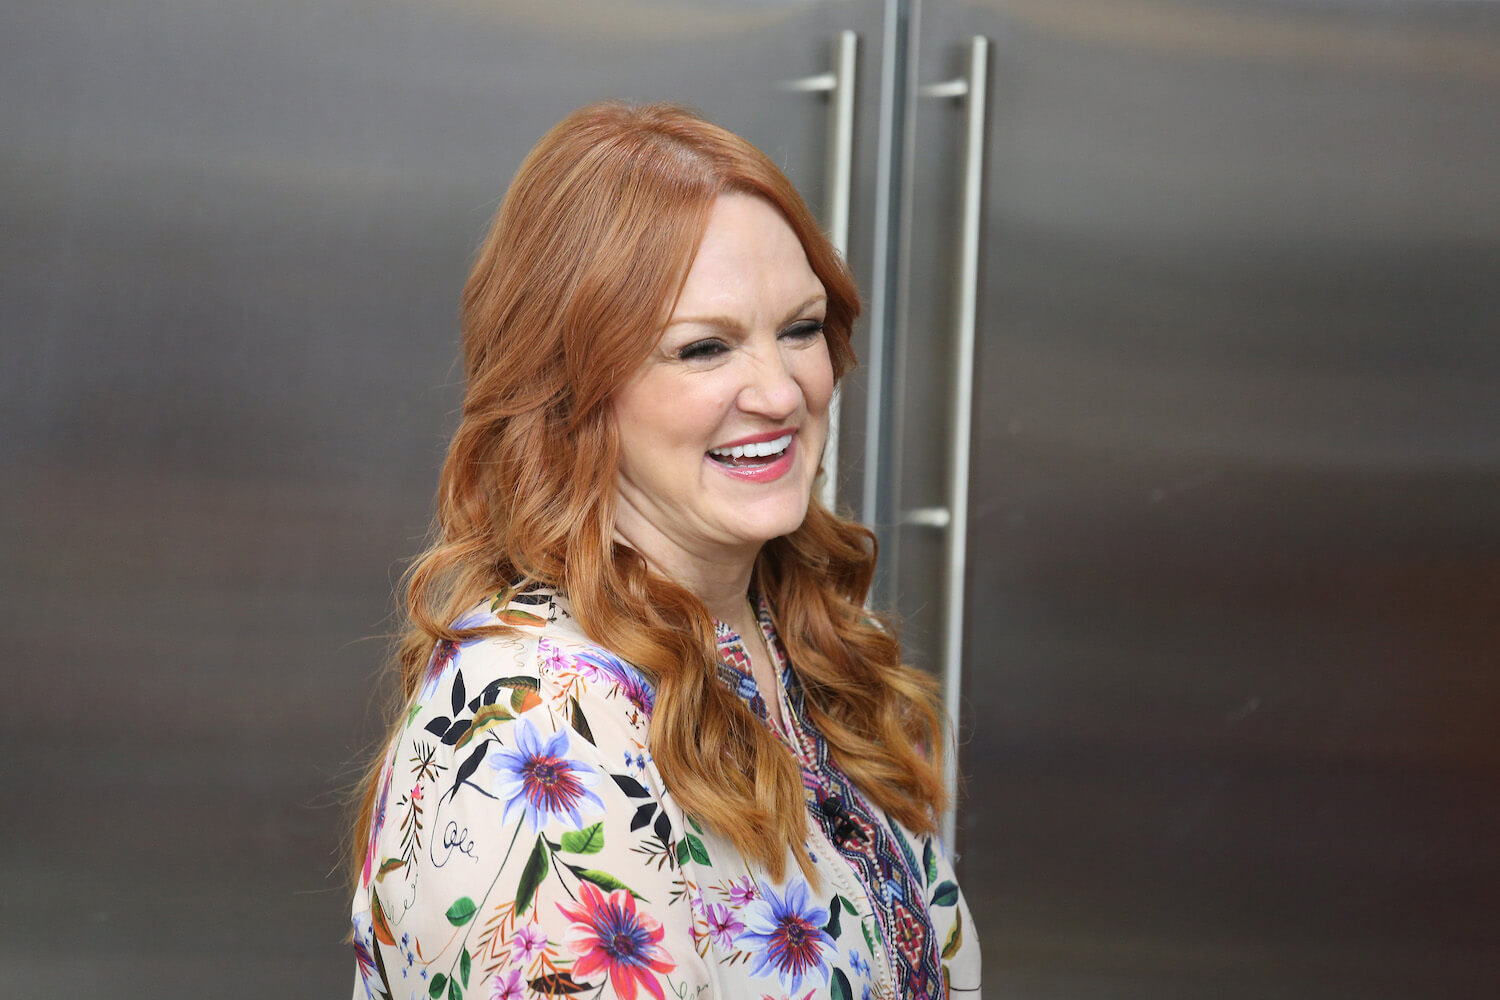 'The Pioneer Woman' Ree Drummond laughing in a kitchen